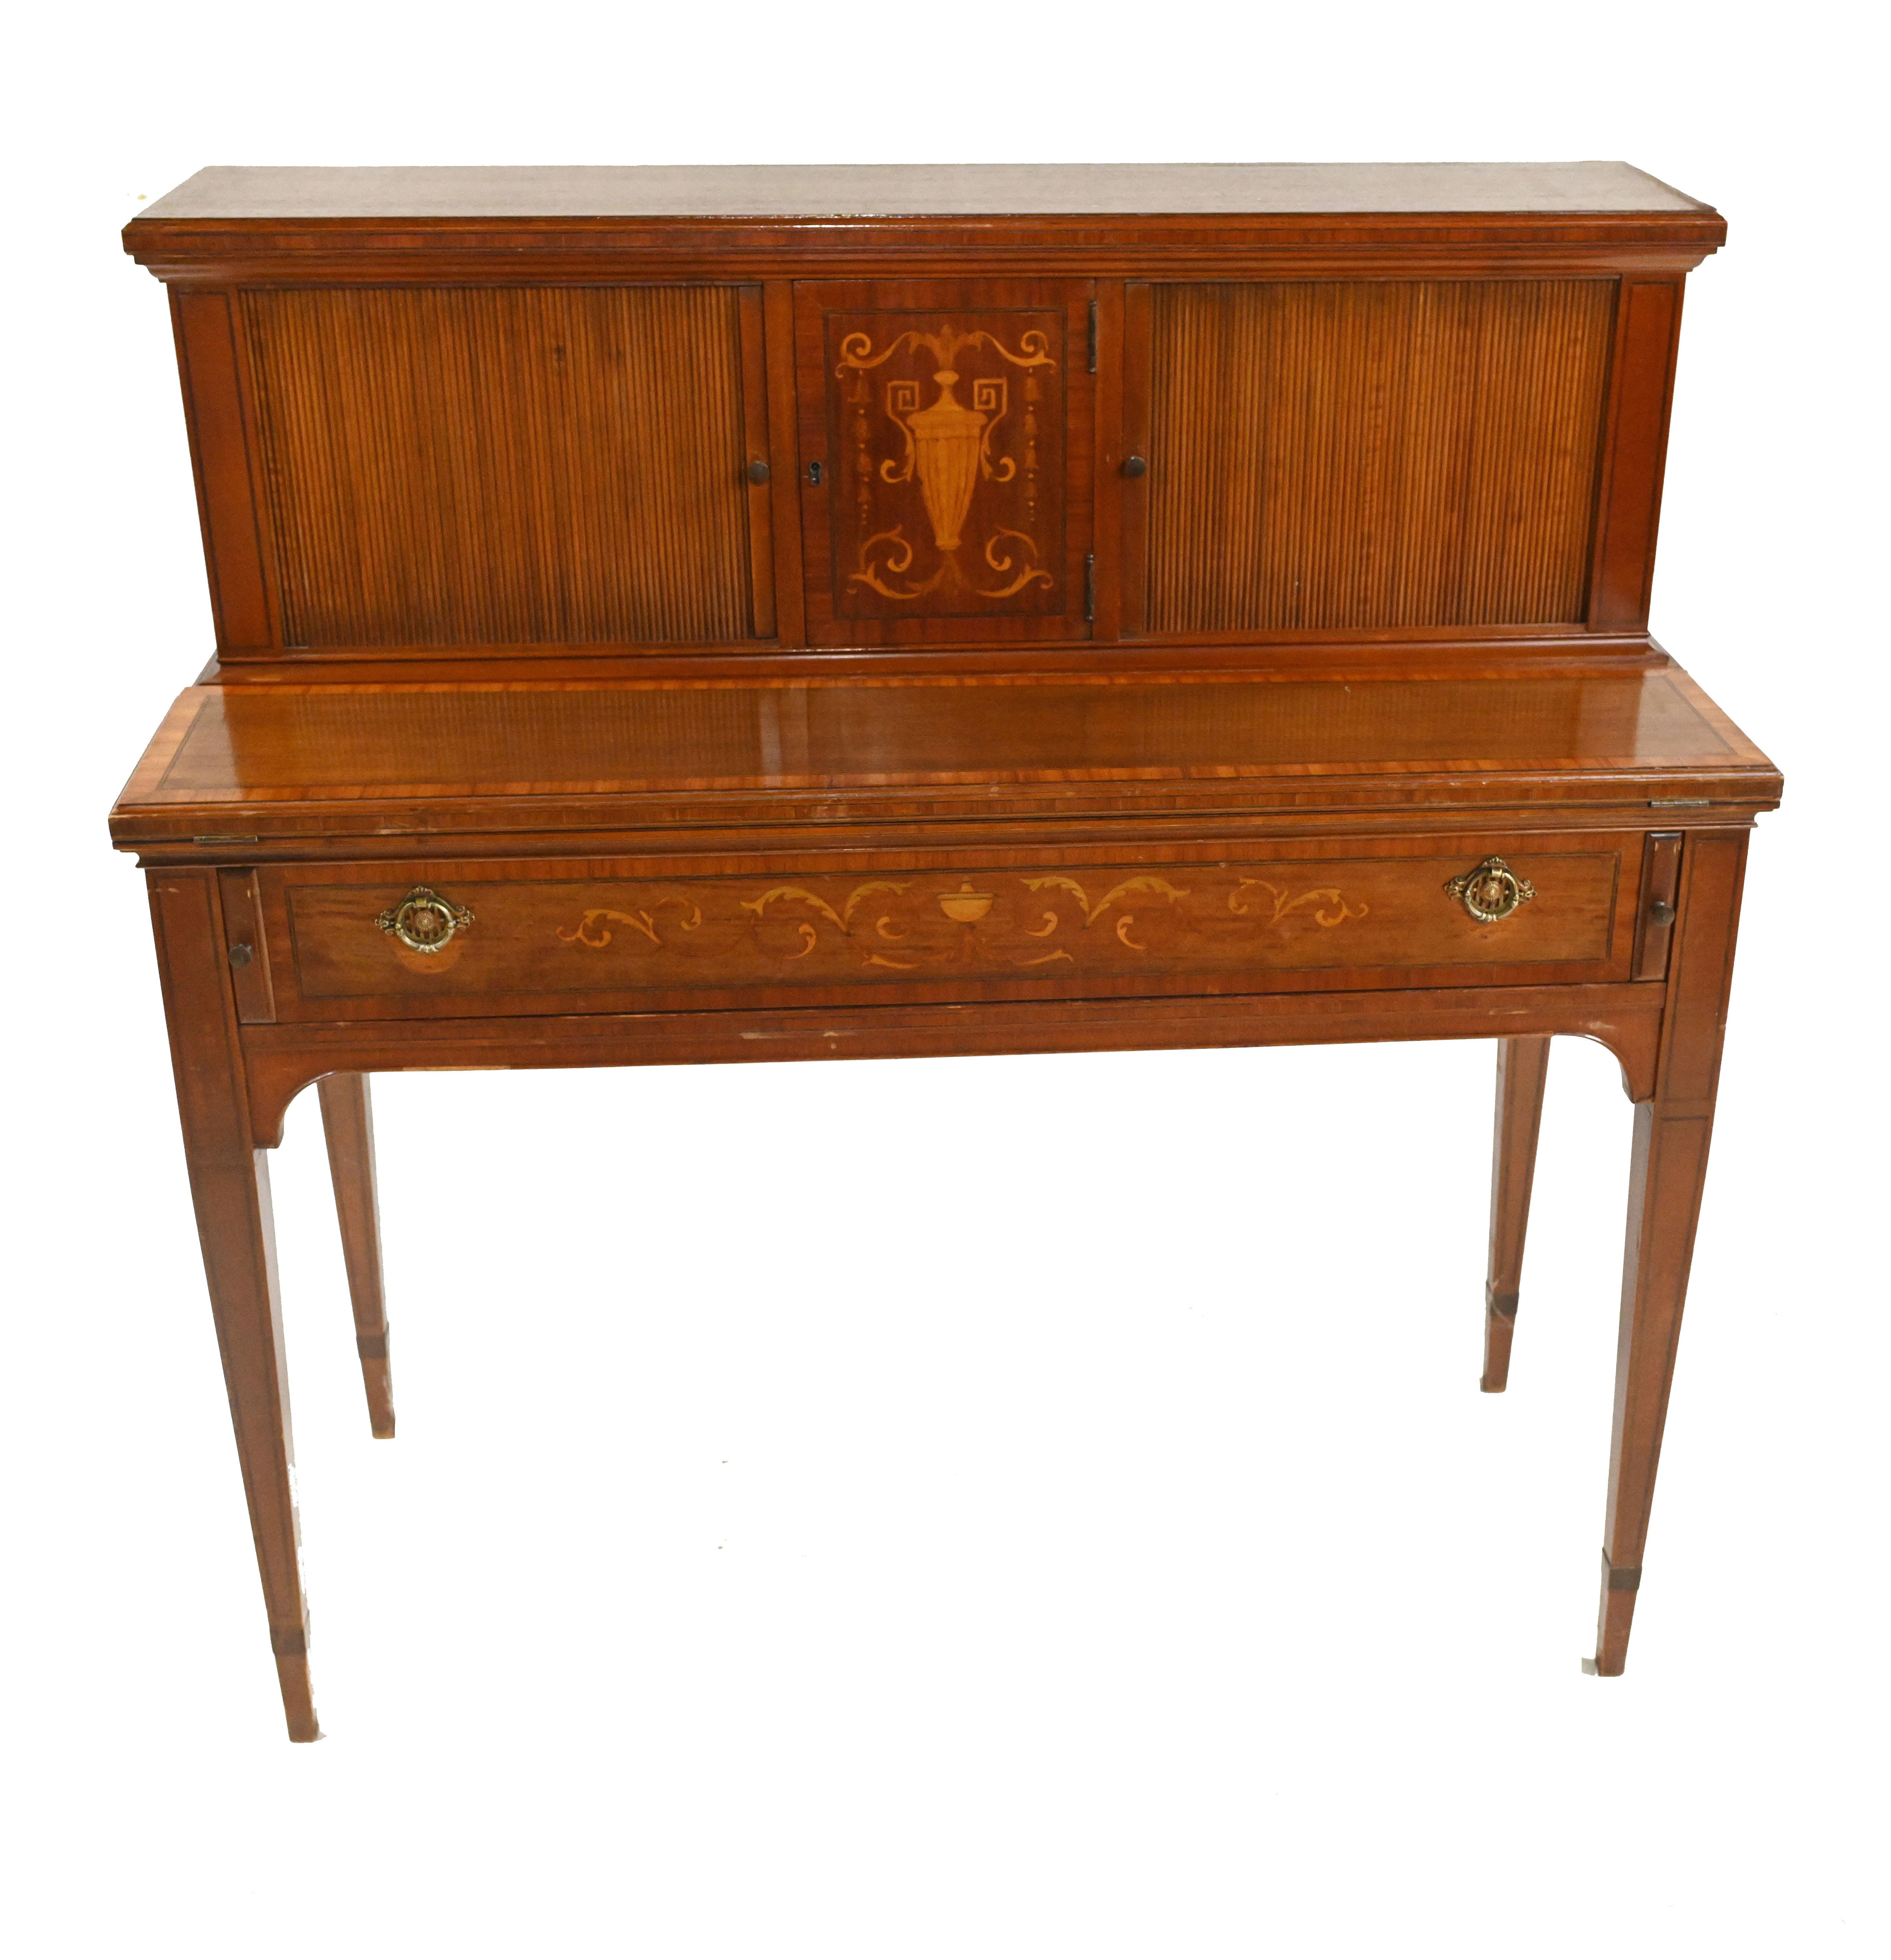 Gorgoeus antique Edwardian desk or writing table.
Circa 1910.
Crafted in mahogany with Sheraton style inlay work
Desk top opens out and cubby holes revealed by sliding doors
Charming, space saving, stylish piece
Offered in great shape ready for